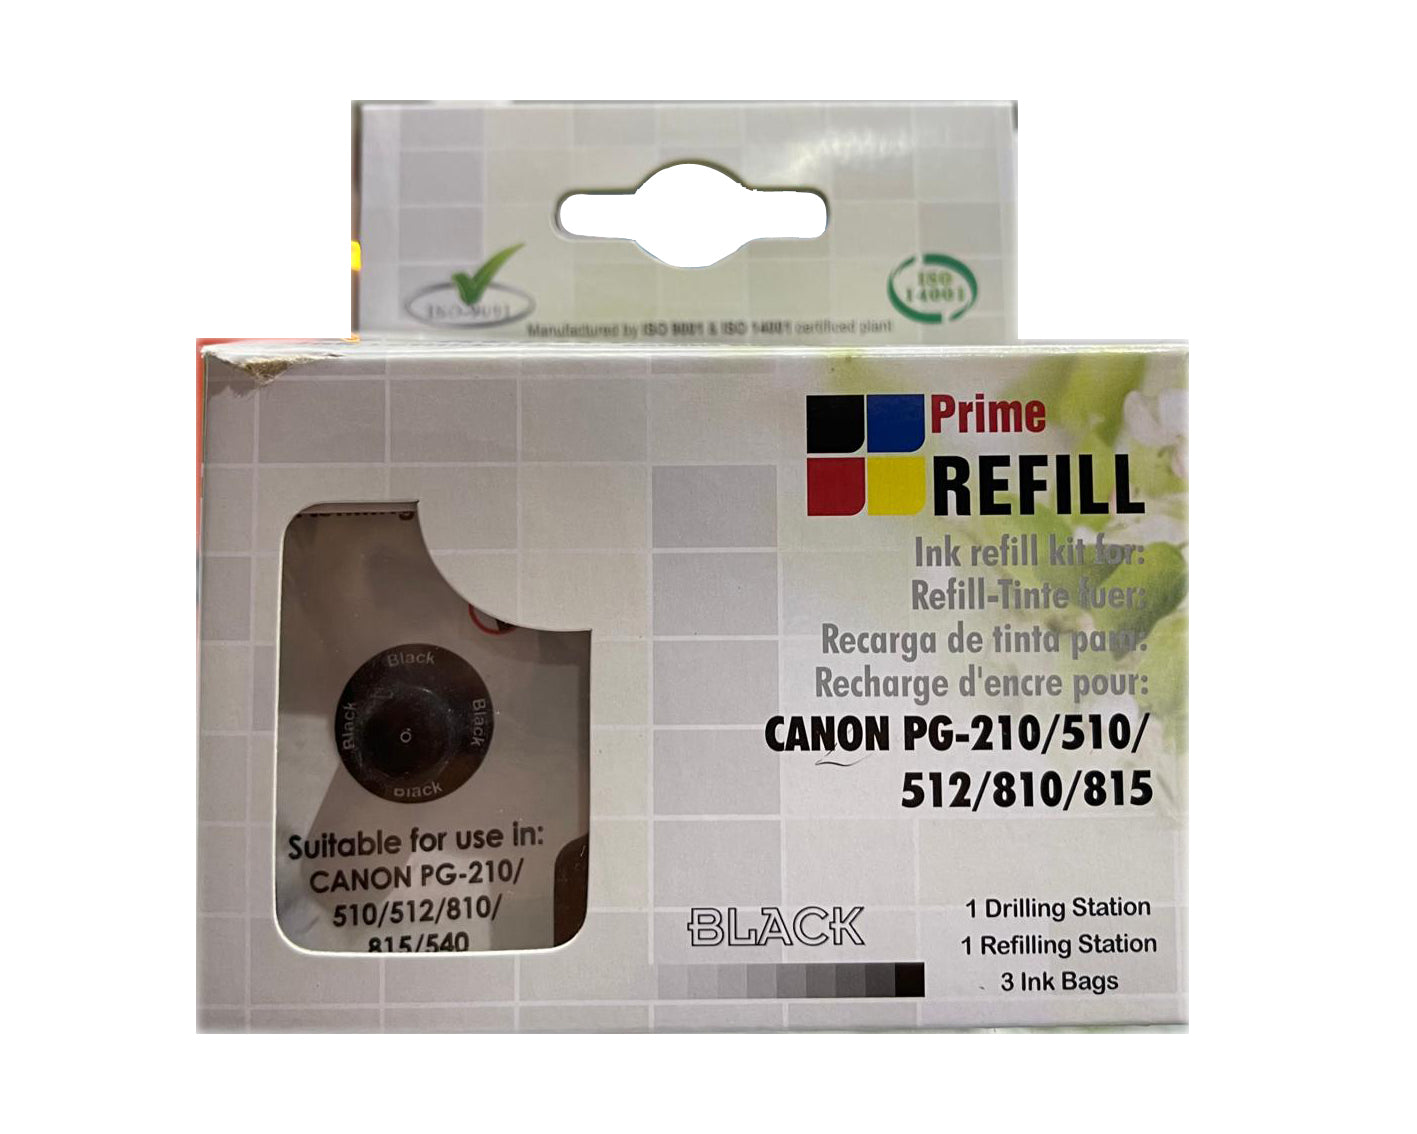 Refill Kit for Refilling Canon 510 and 440  Black Ink Cartridge